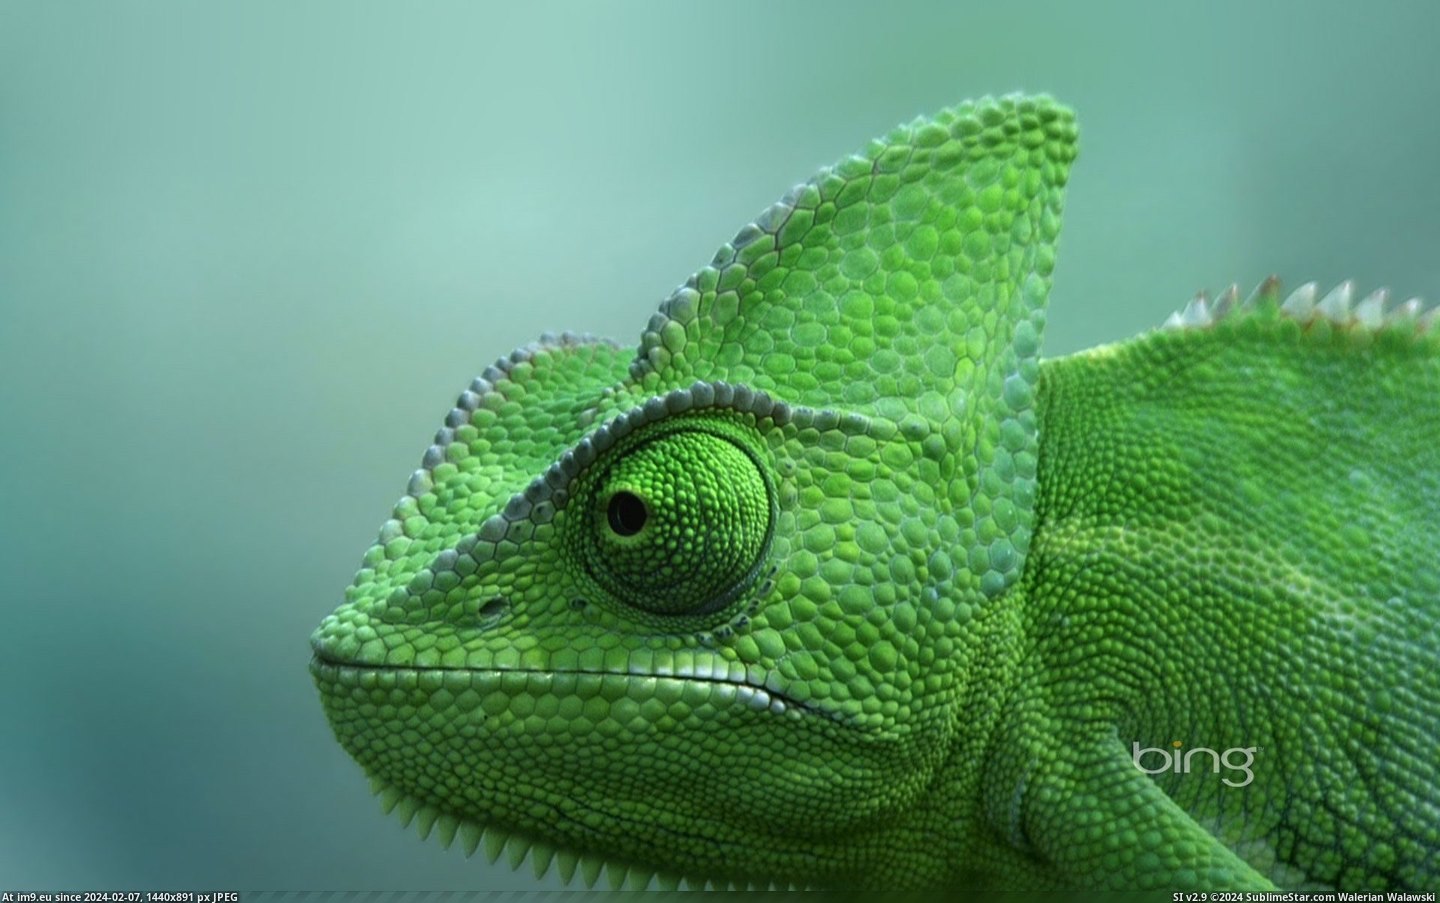 Veiled chameleon at the TerraZoo in Rheinberg, Germany (ClipCanvas) 2013-03-06 (in Best photos of March 2013)